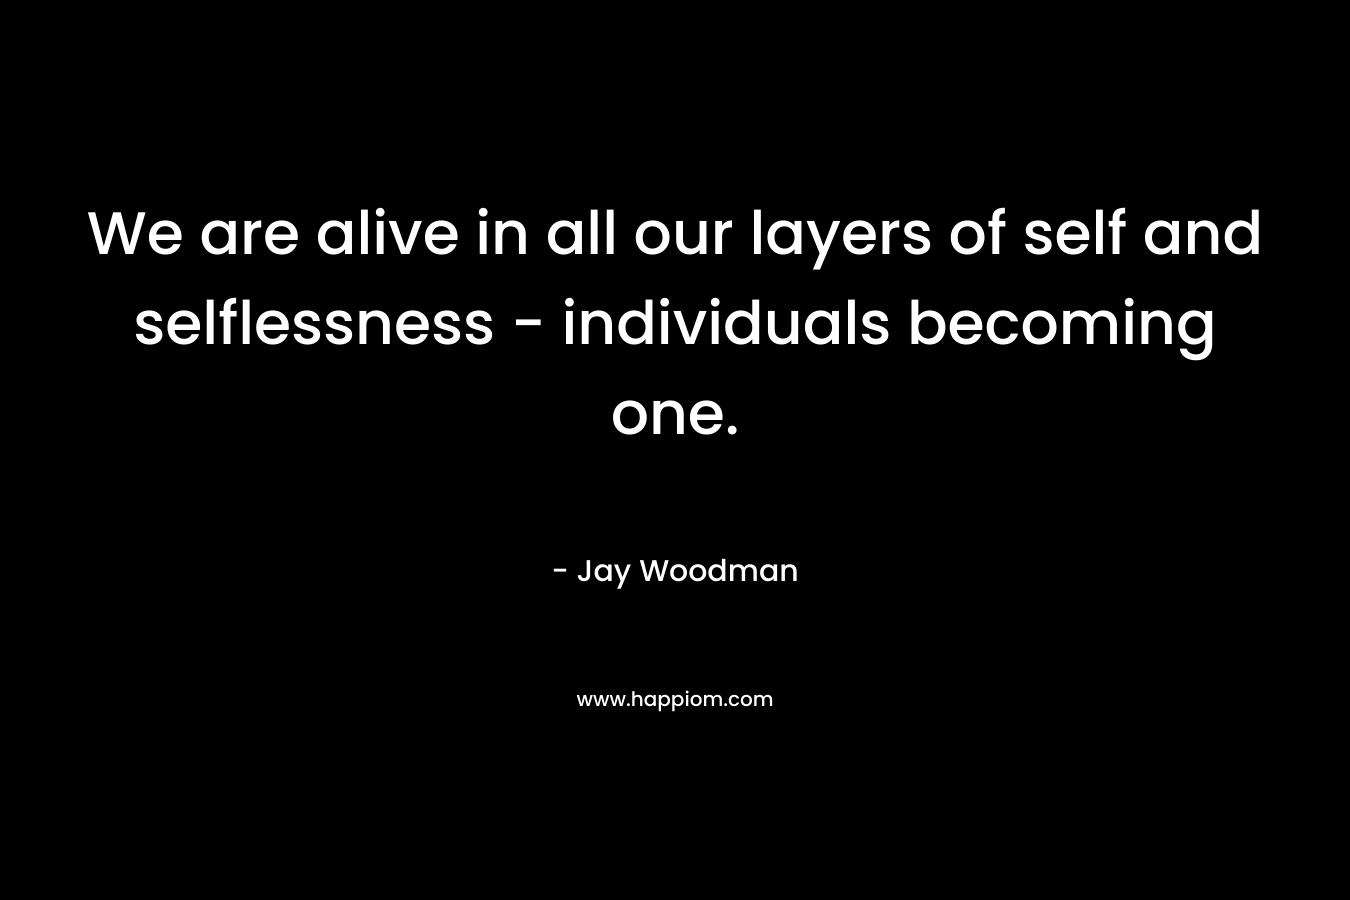 We are alive in all our layers of self and selflessness - individuals becoming one.